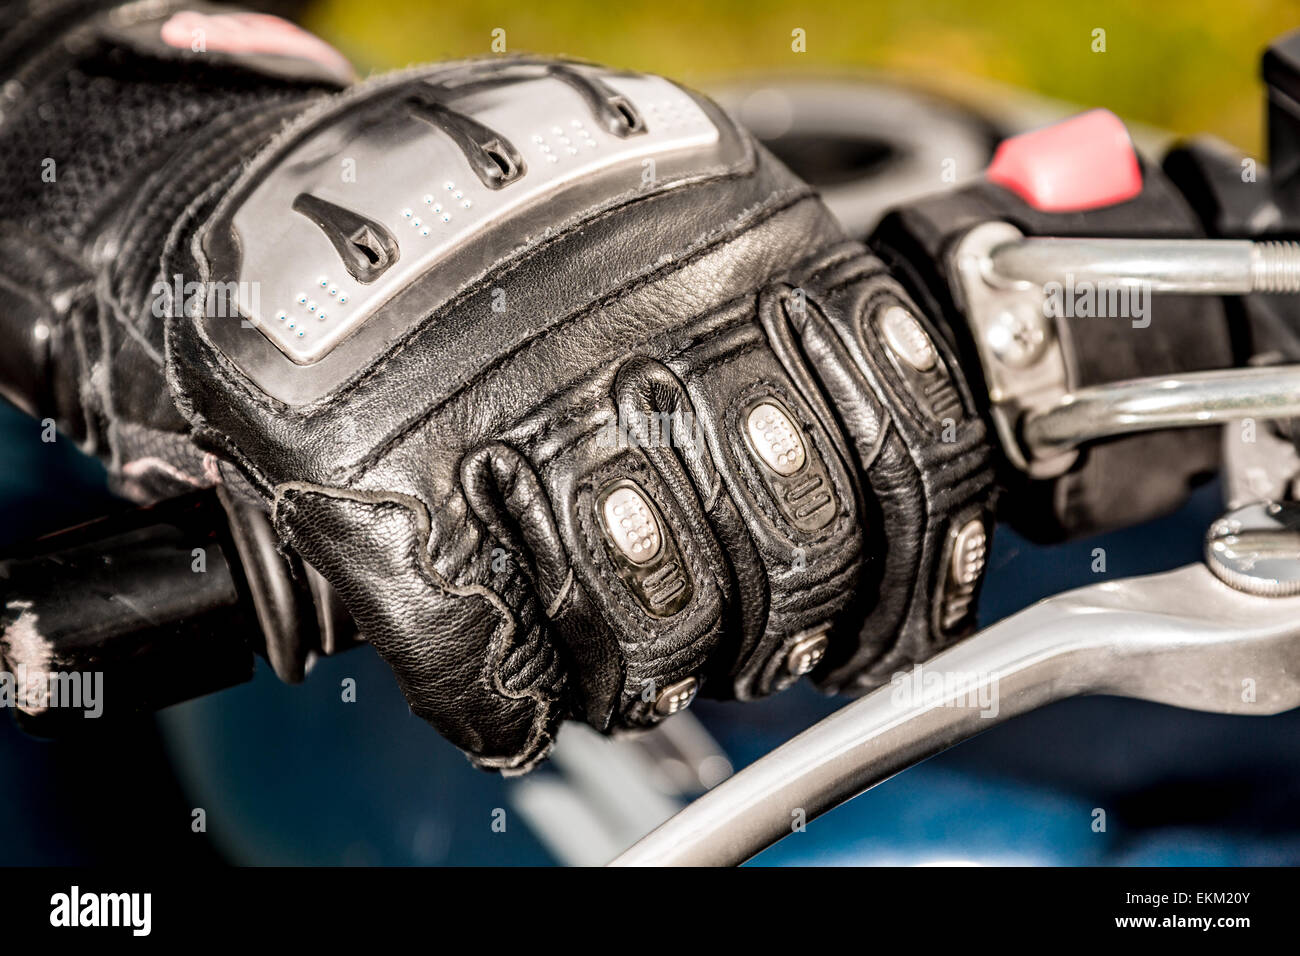 Human hand in a Motorcycle Racing Gloves holds a motorcycle throttle  control. Hand protection from falls and accidents Stock Photo - Alamy